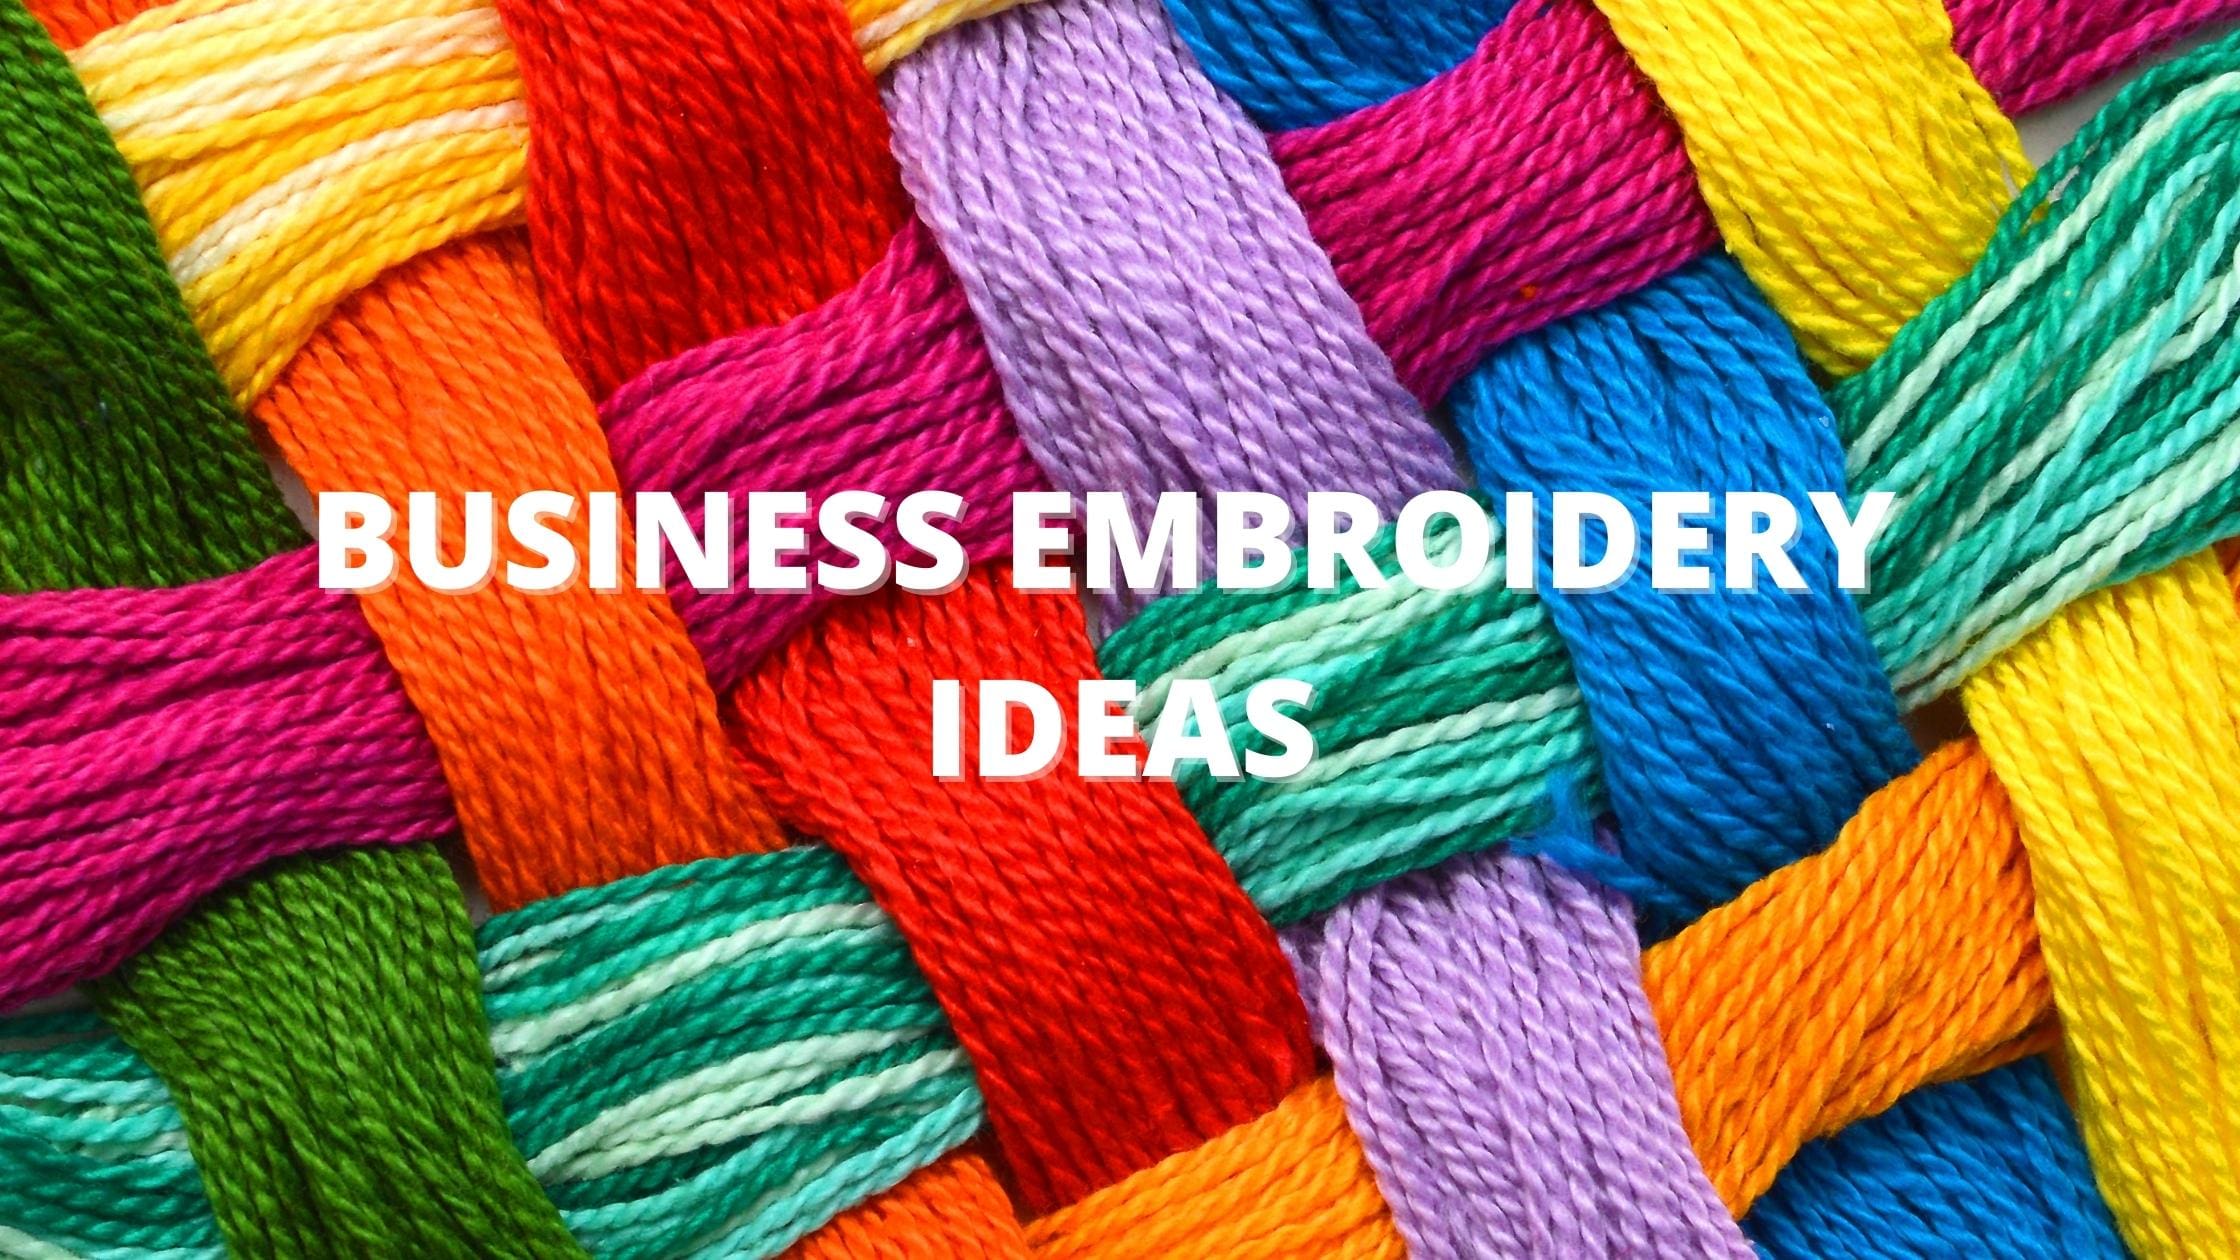 Business Embroidery Ideas - Yhtack in Stitches